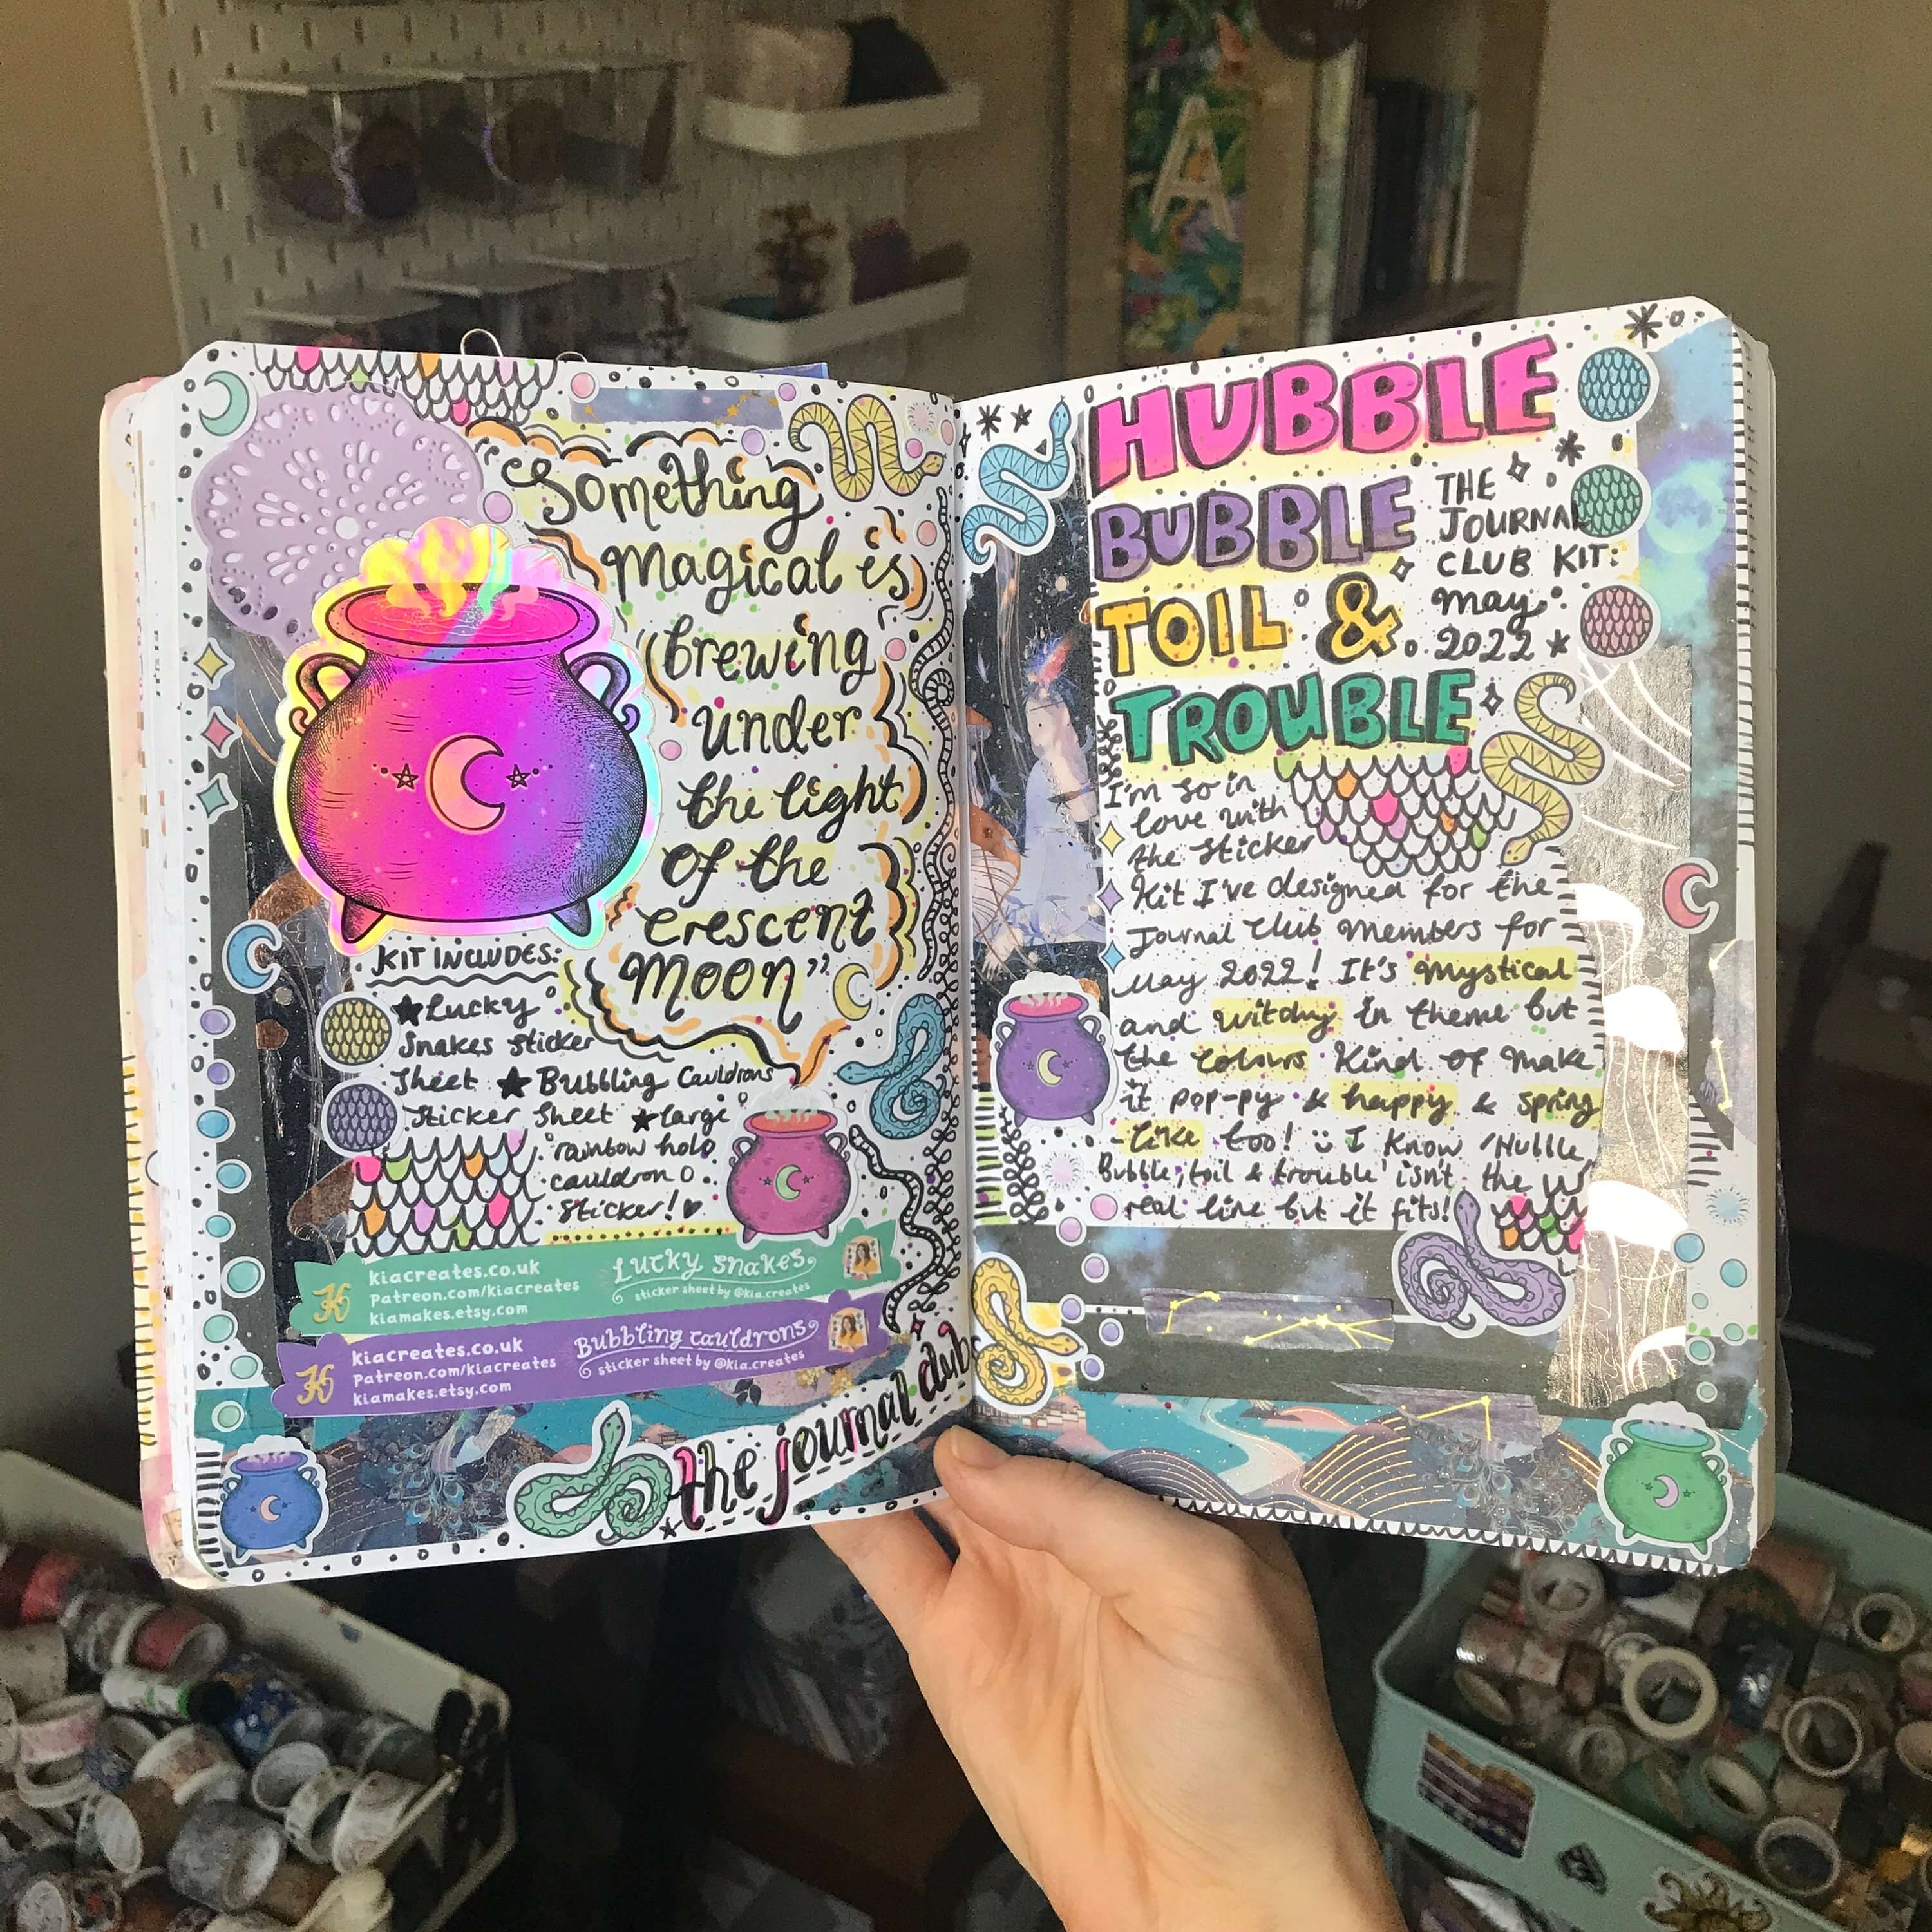 Witchy Creative Journal Spread by Kia Creates featuring Cauldron Holographic Sticker - Lucky Snakes Sticker Sheet - Bubbling Cauldrons Sticker Sheet